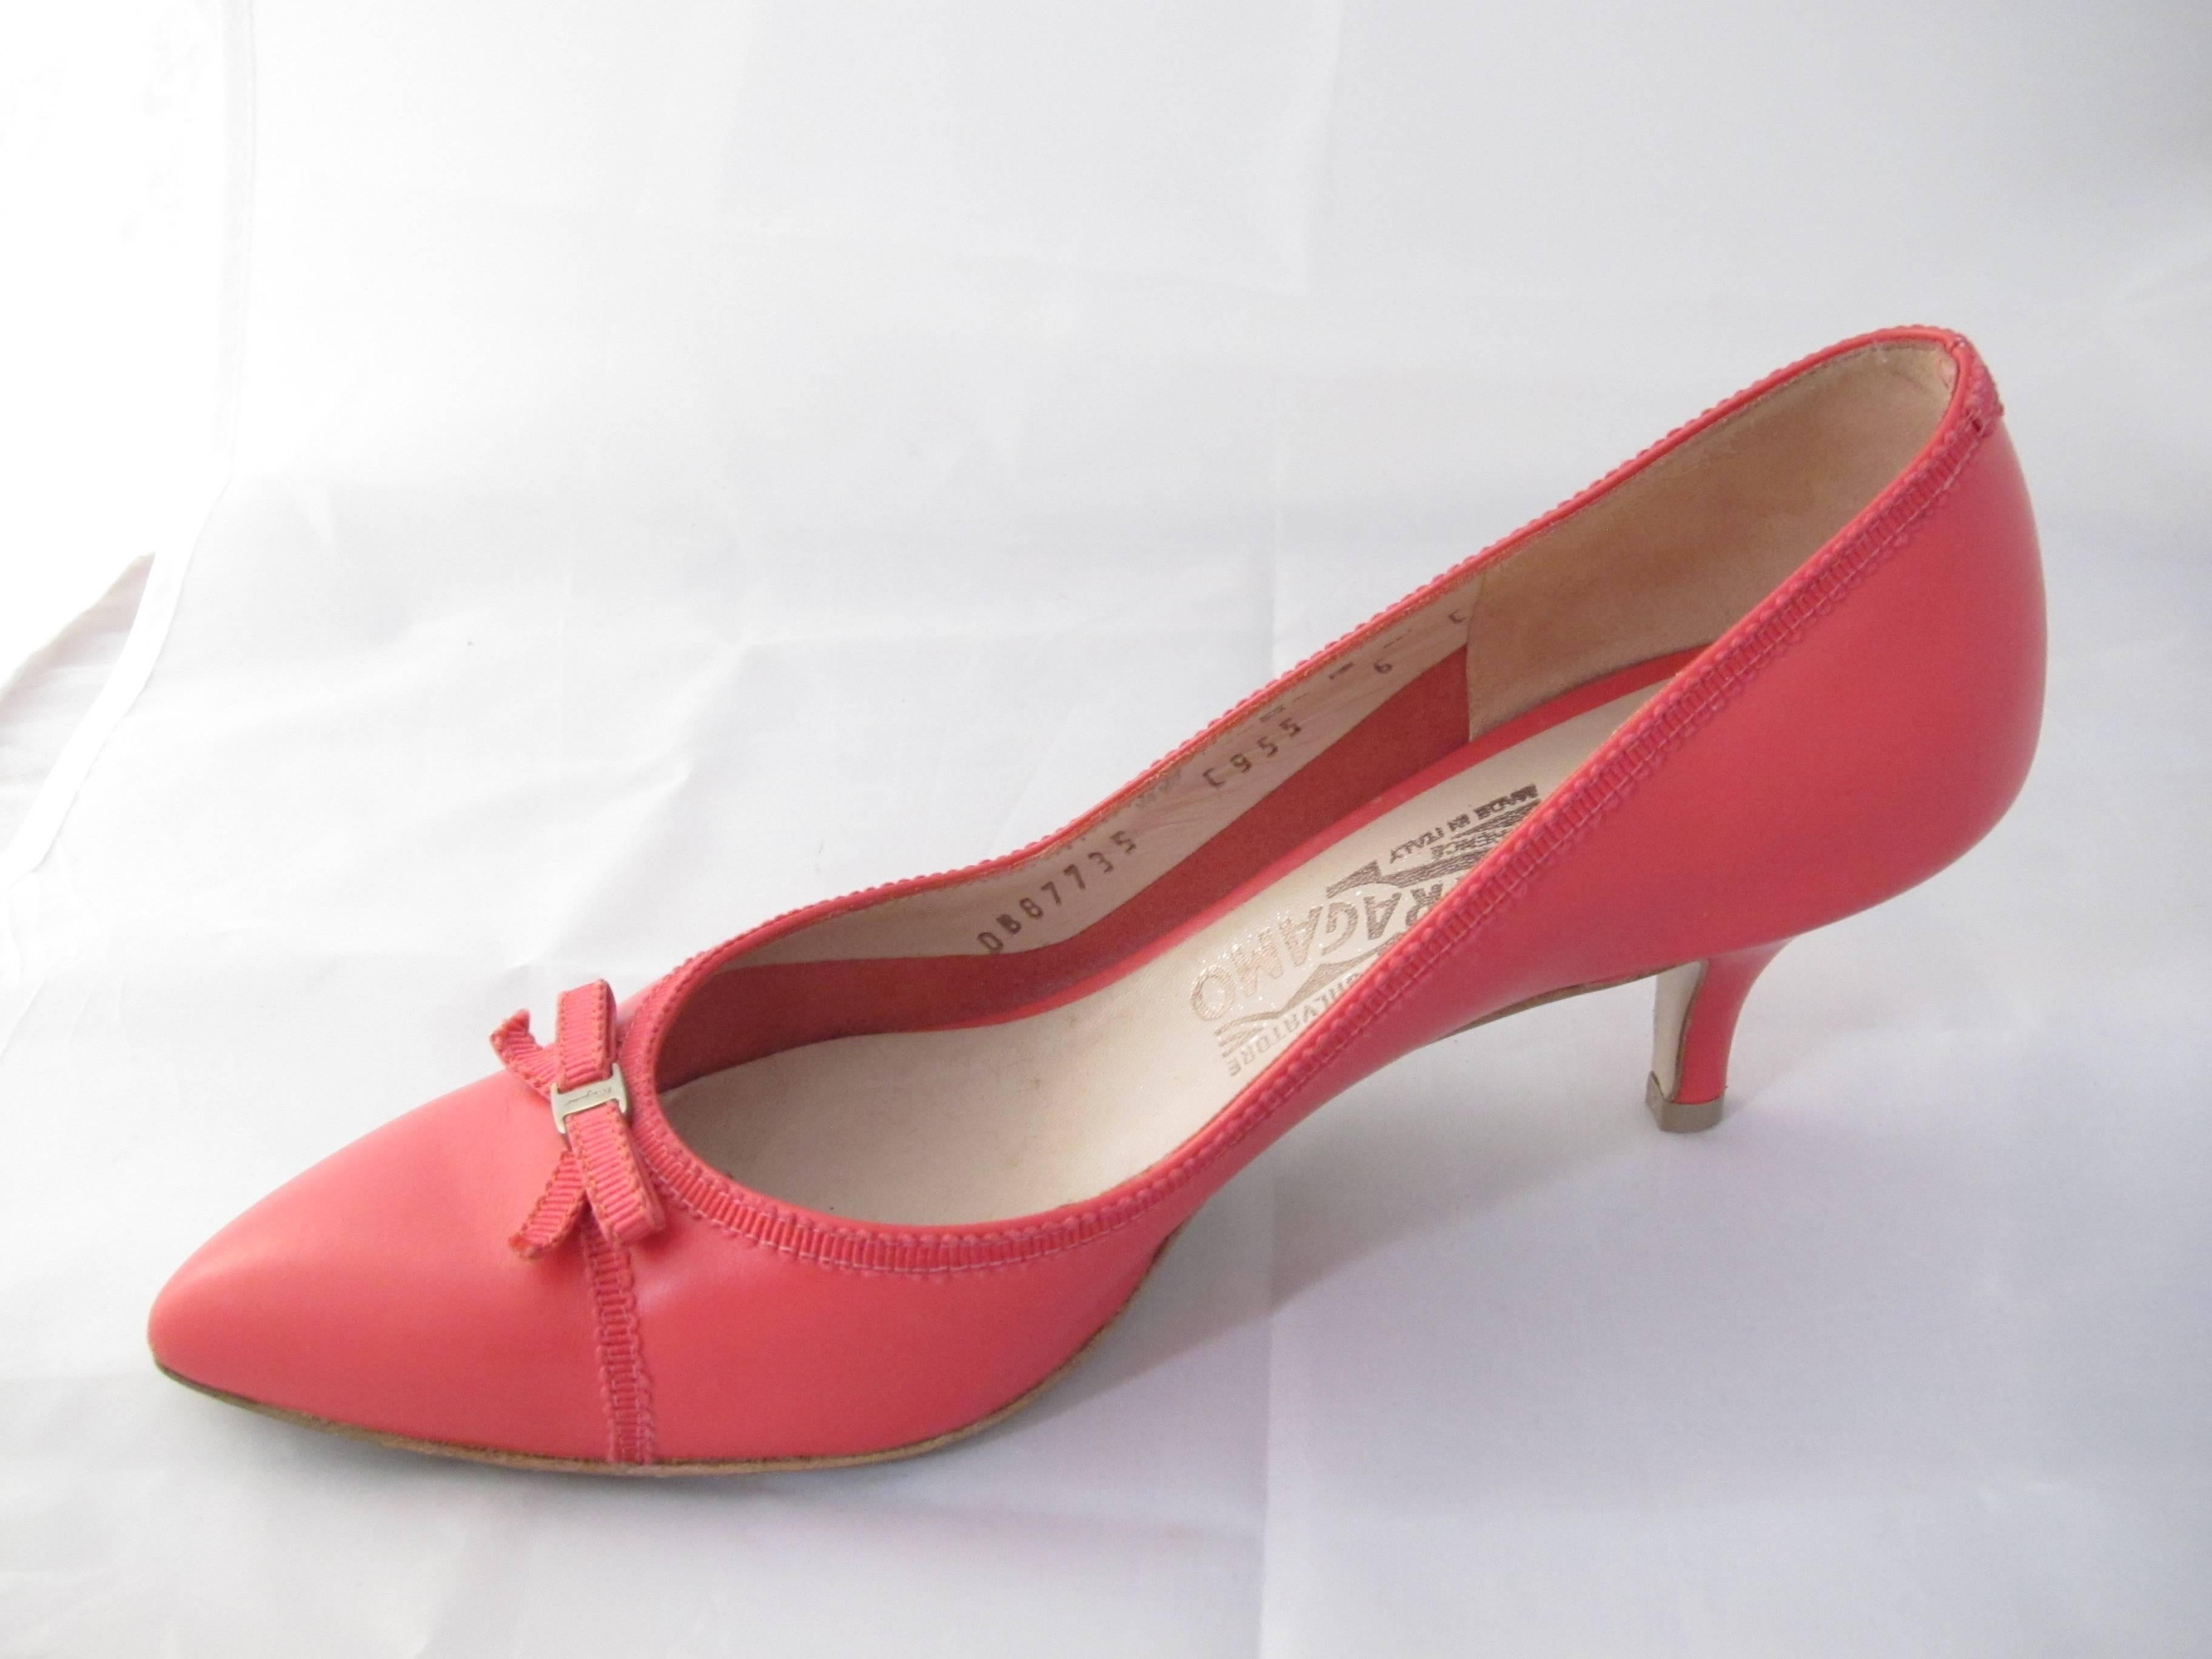 Salvatore Ferragamo low Heel pink shoes
Size .37

Heel 5 cm

Good condition, some sign of wear in the sole.